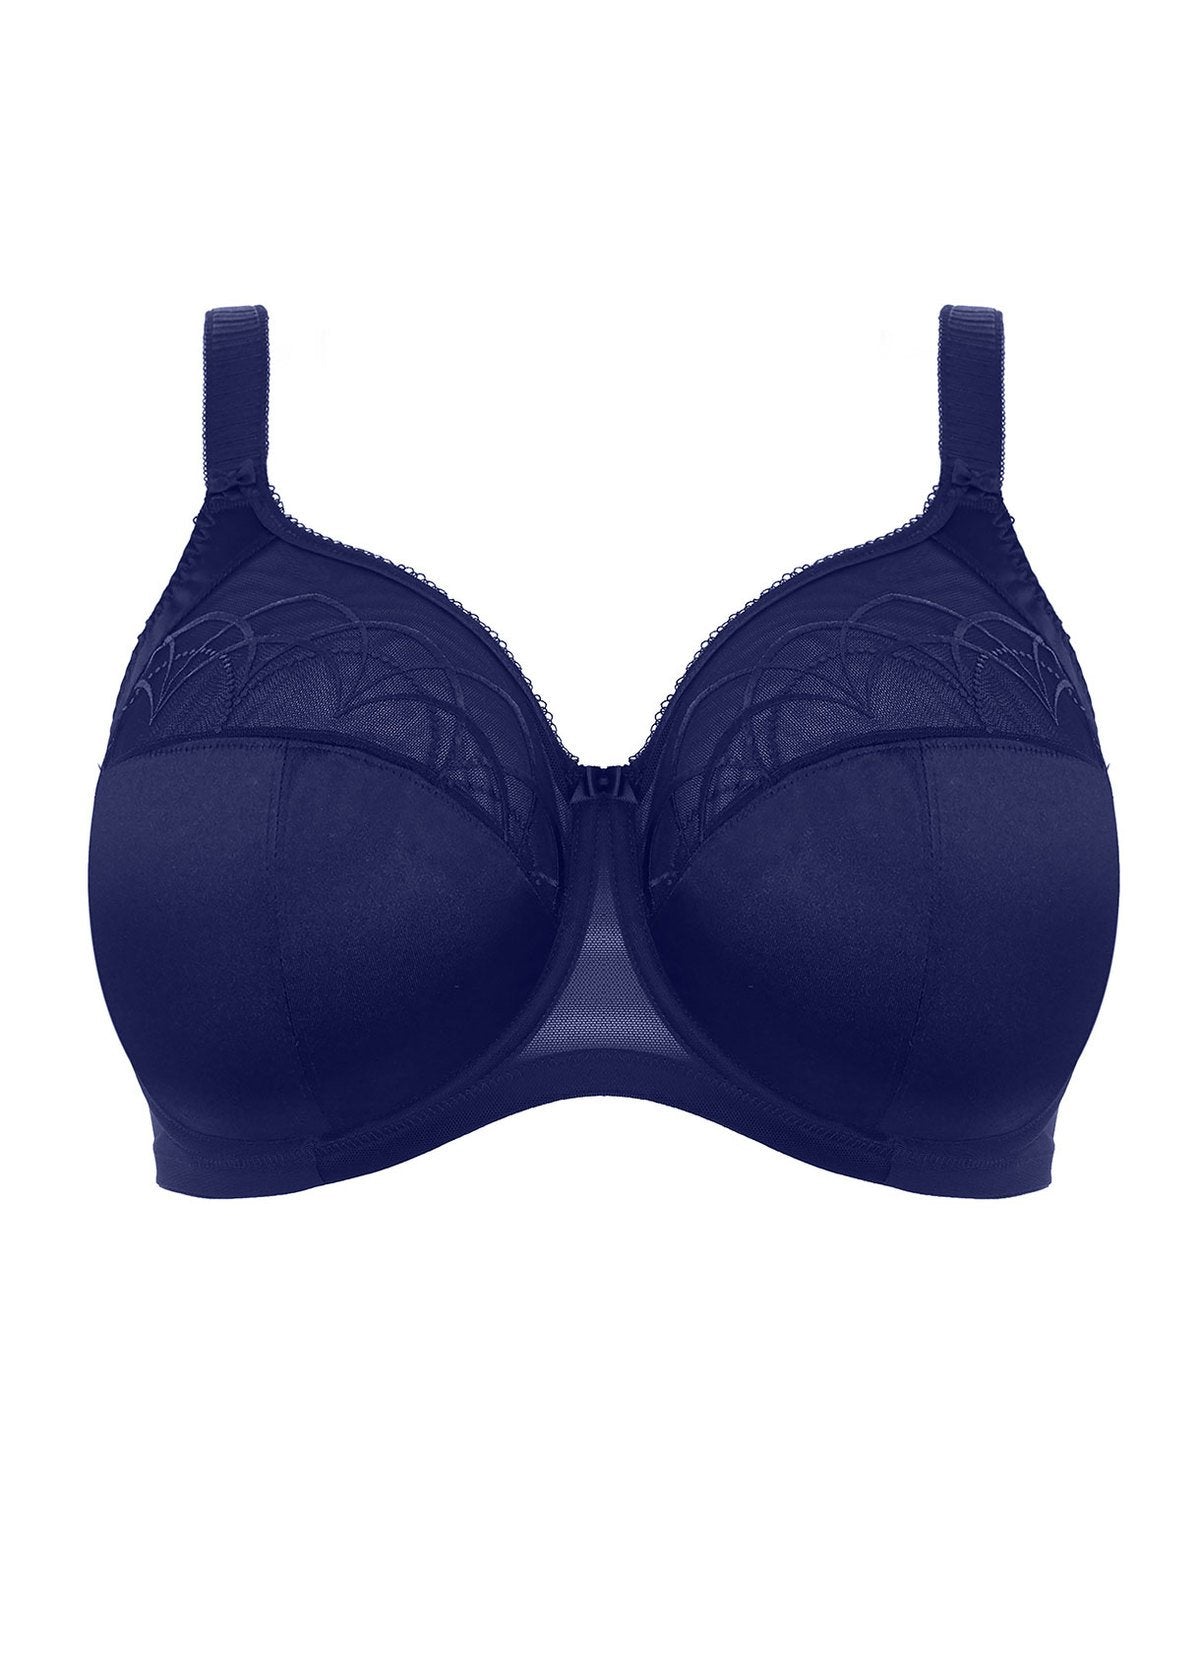 Elomi Cate - Fashion Colourway - Underwire Bra  Available at Illusions Lingerie